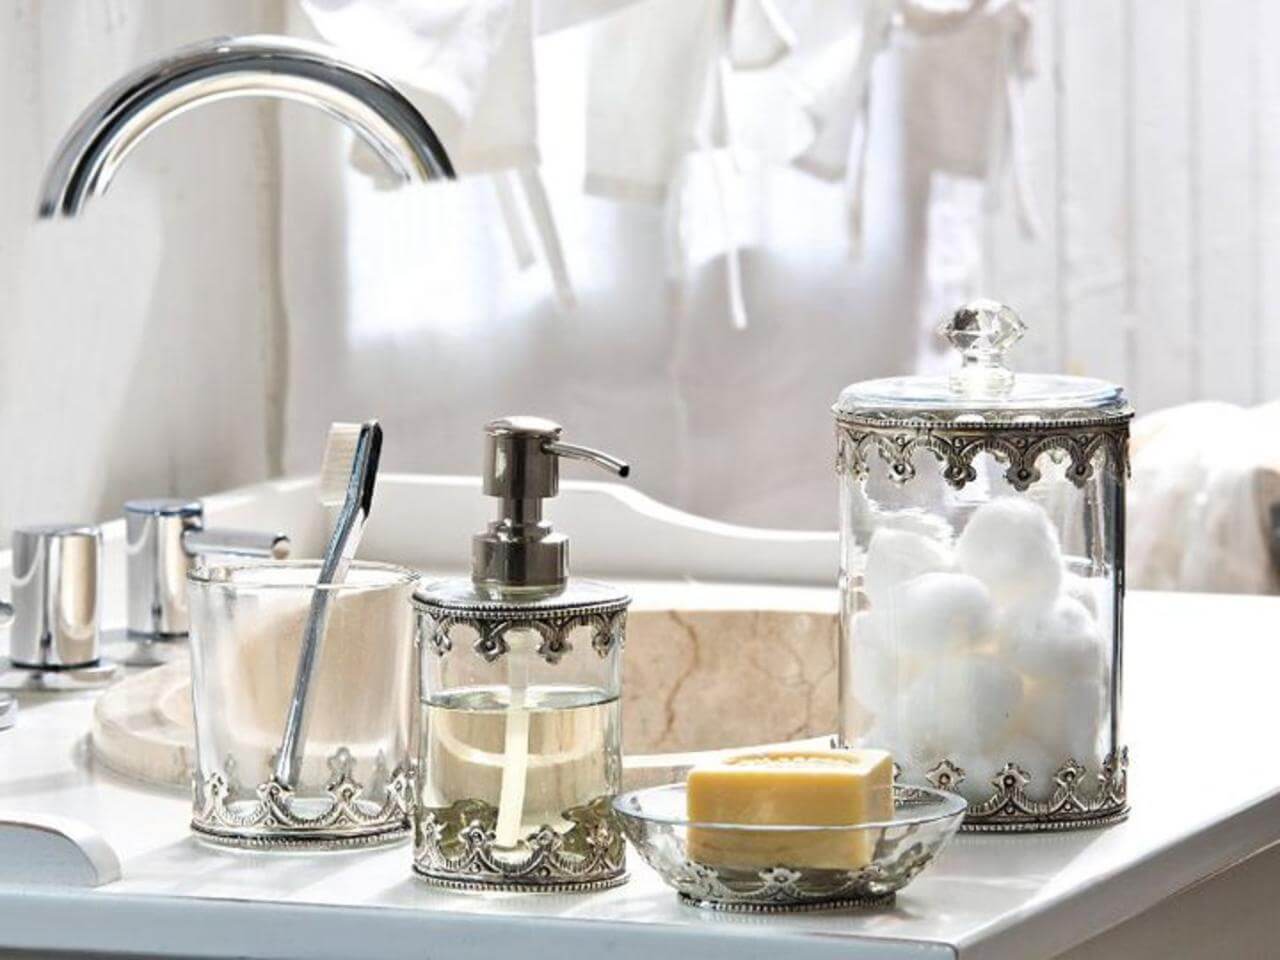 Vintage-Inspired Metal and Glass Bathroom Accessories